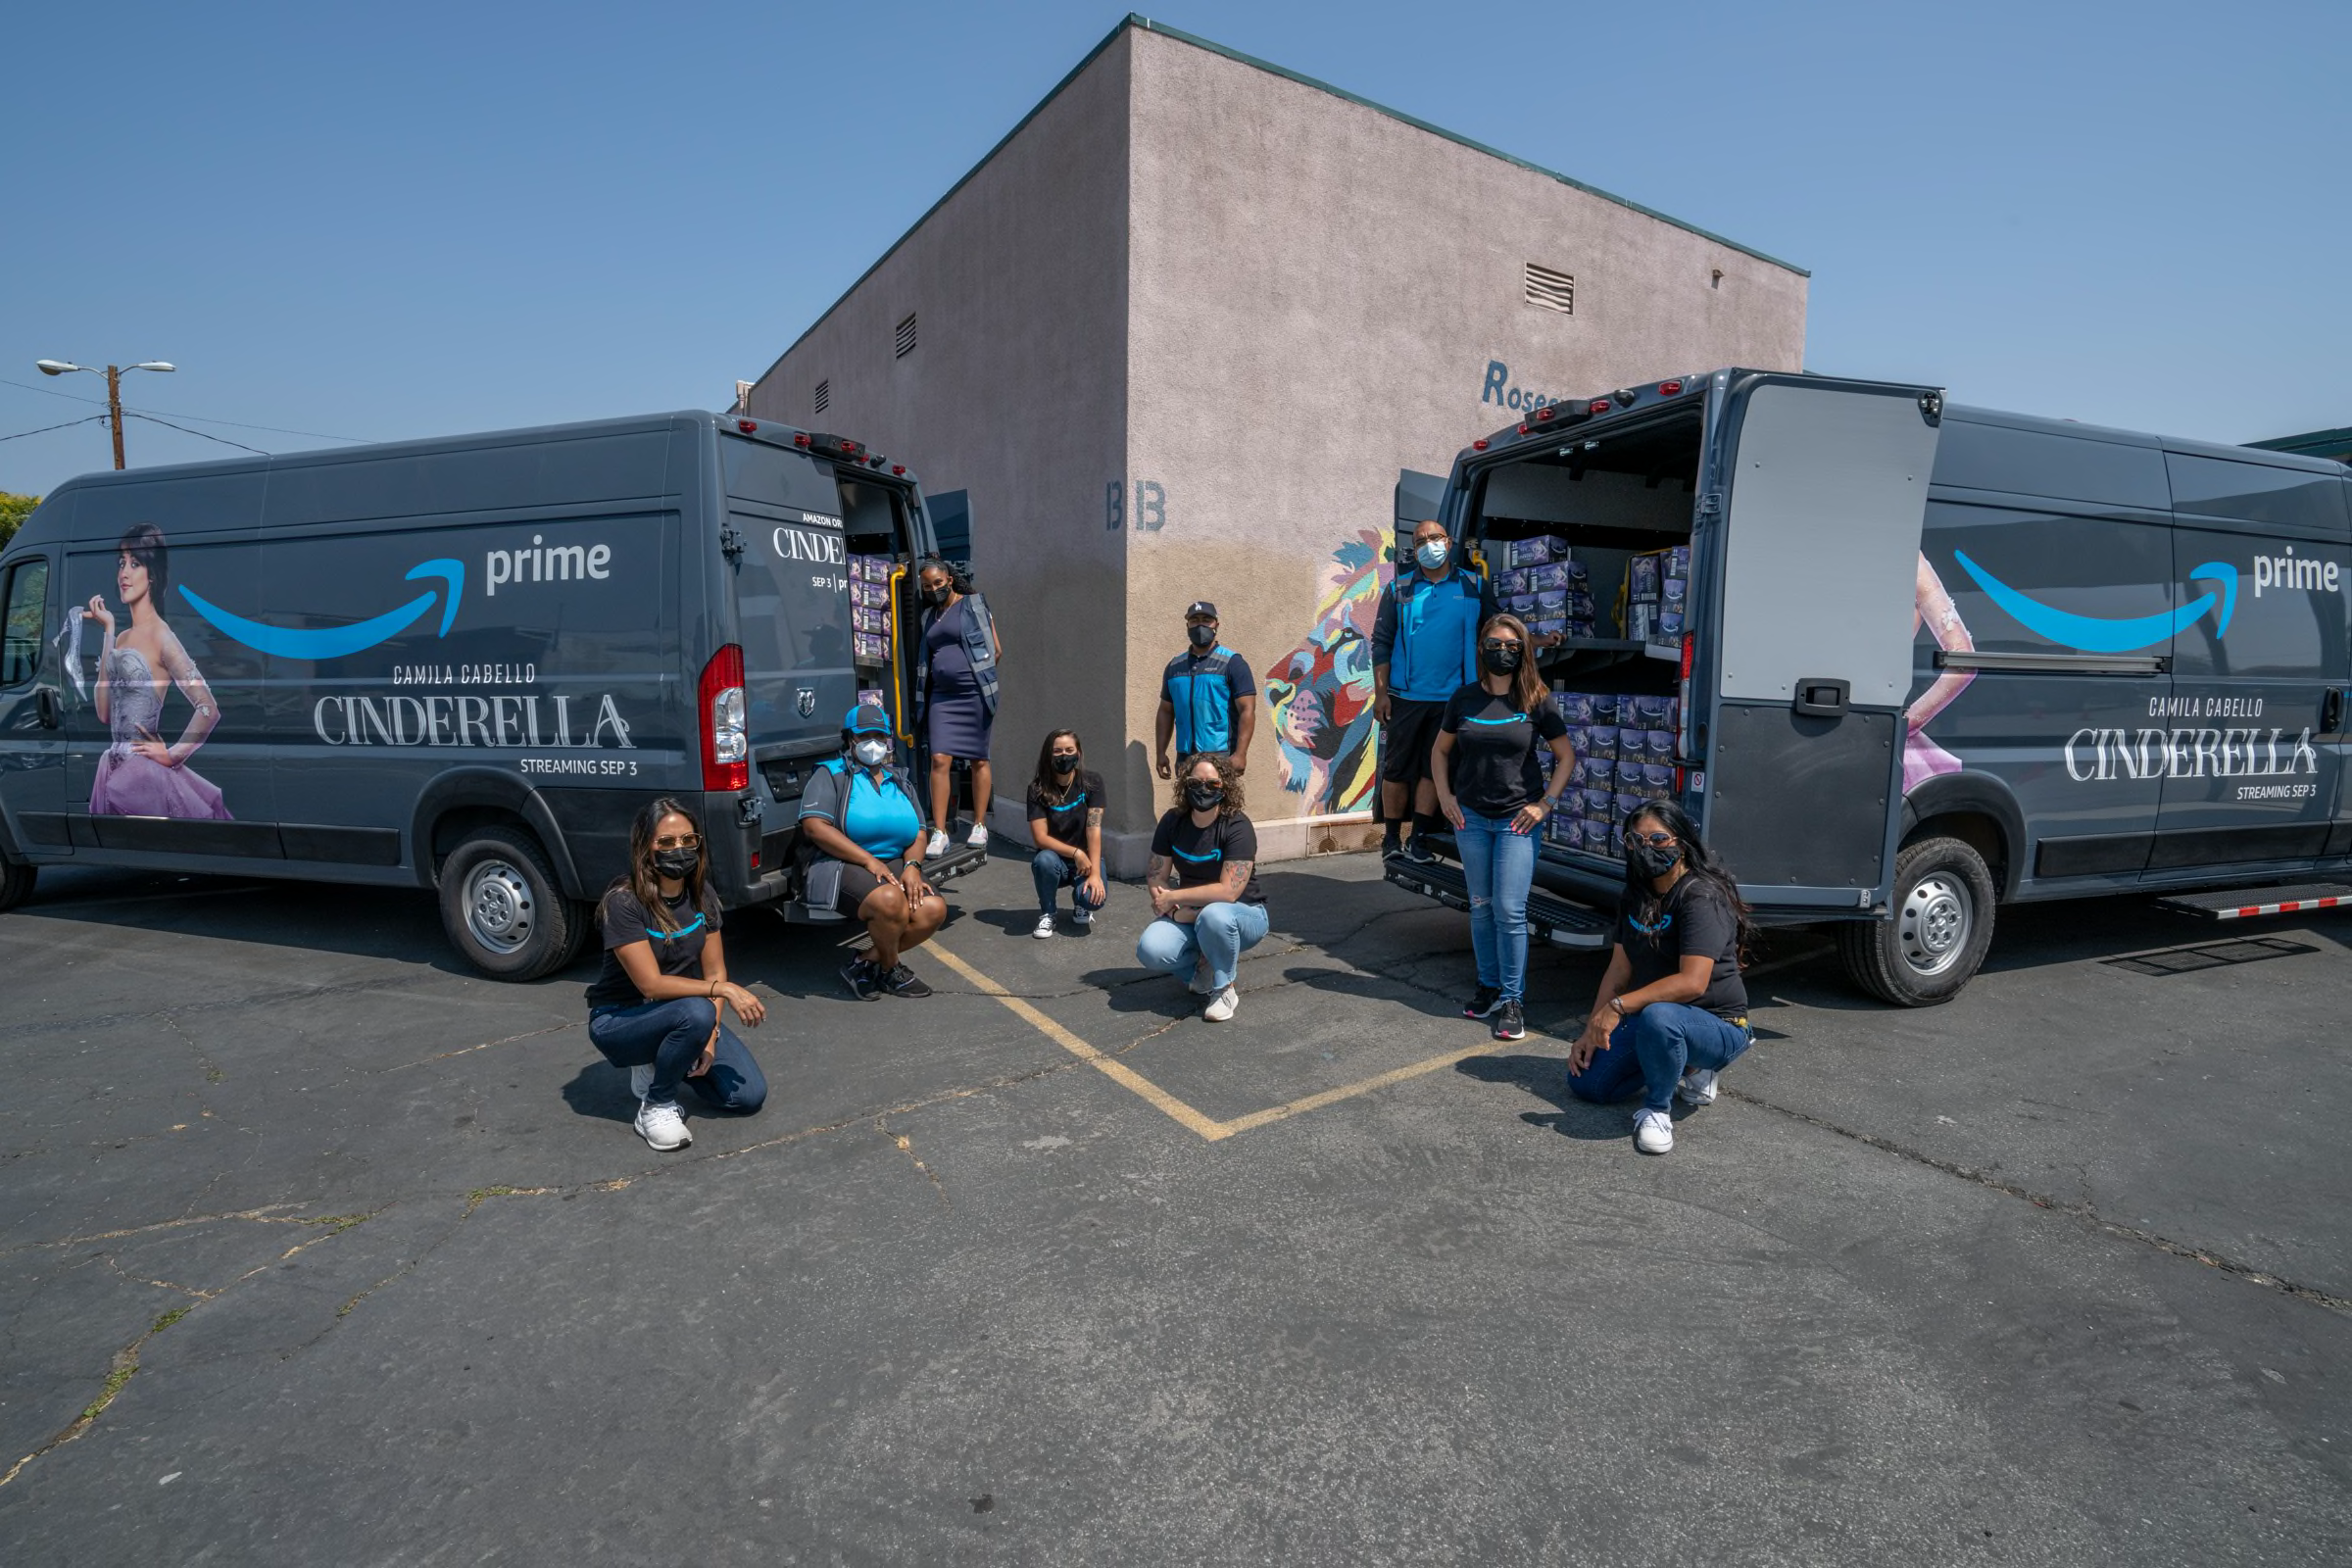 Amazon Prime team ready to give away shoes at Rosecrans Elementary School in Compton. Courtesy of The Brand Agency.